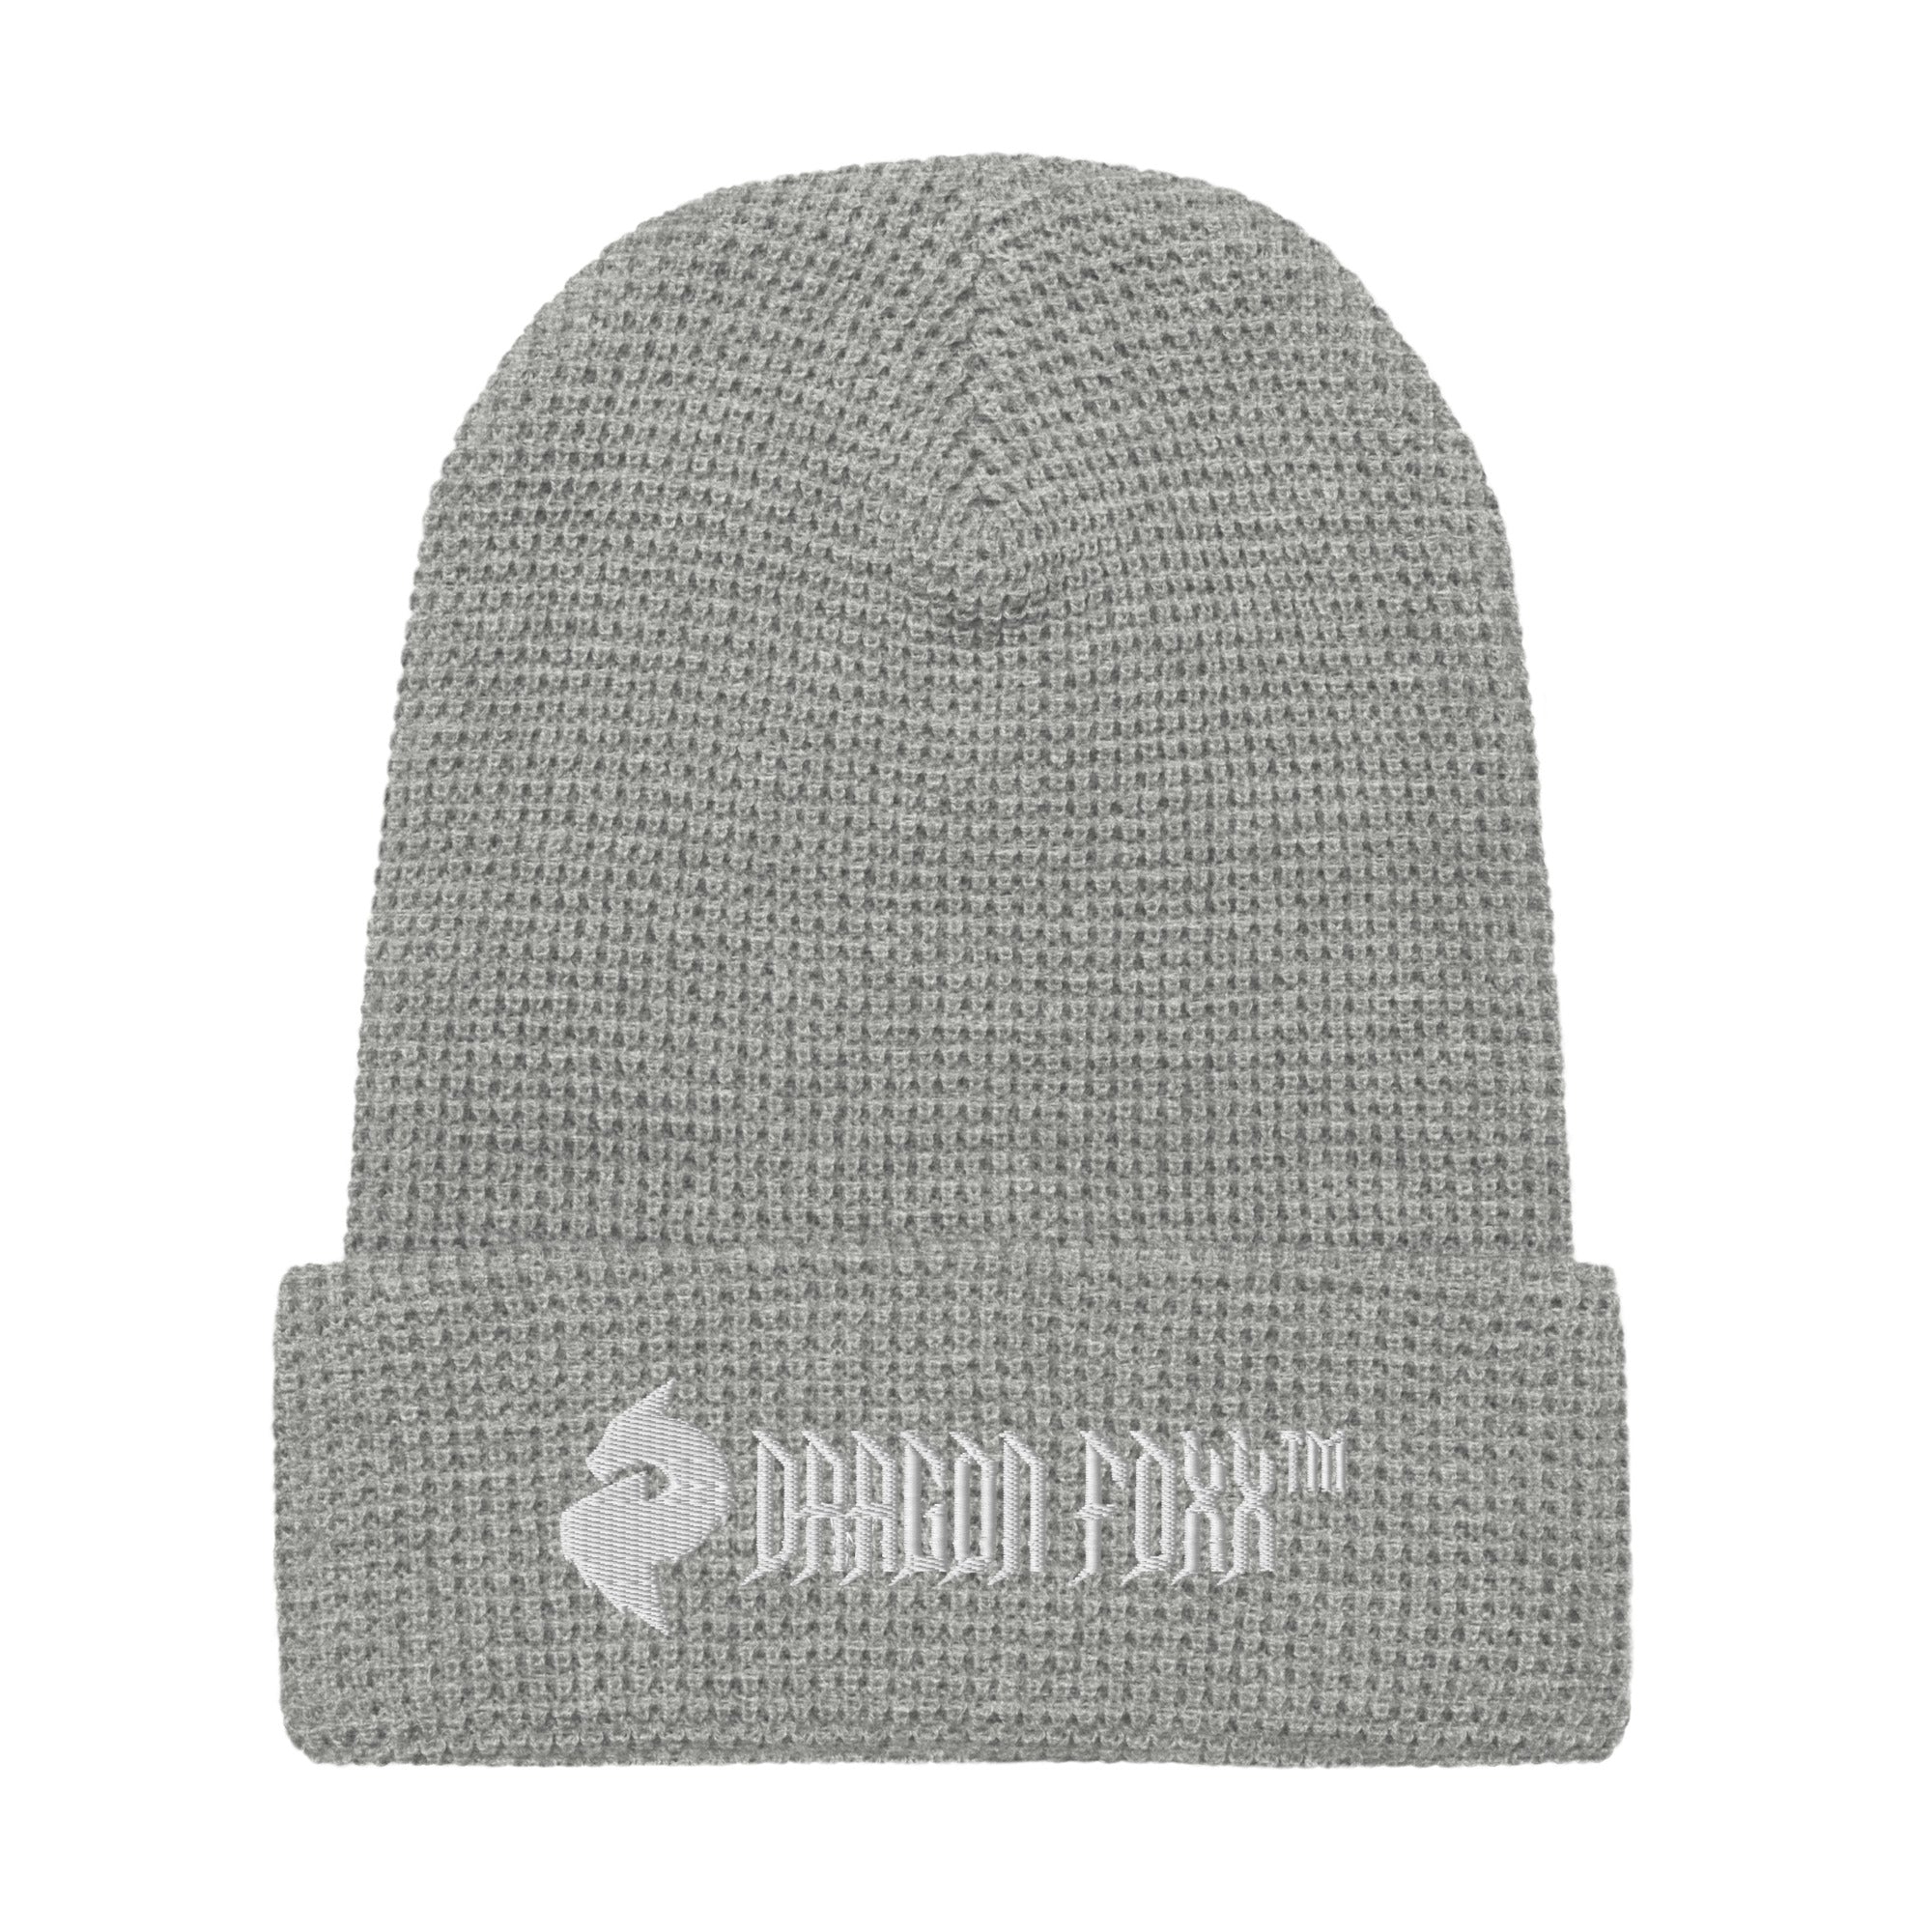 His or Hers Dragon Foxx™ Waffle beanie in 7 Colors - His or Hers Dragon Foxx™ Waffle beanie - DRAGON FOXX™ - His or Hers Dragon Foxx™ Waffle beanie in 7 Colors - 3986040_16177 - Heather Grey - - Accessories - Beanie - Beanies